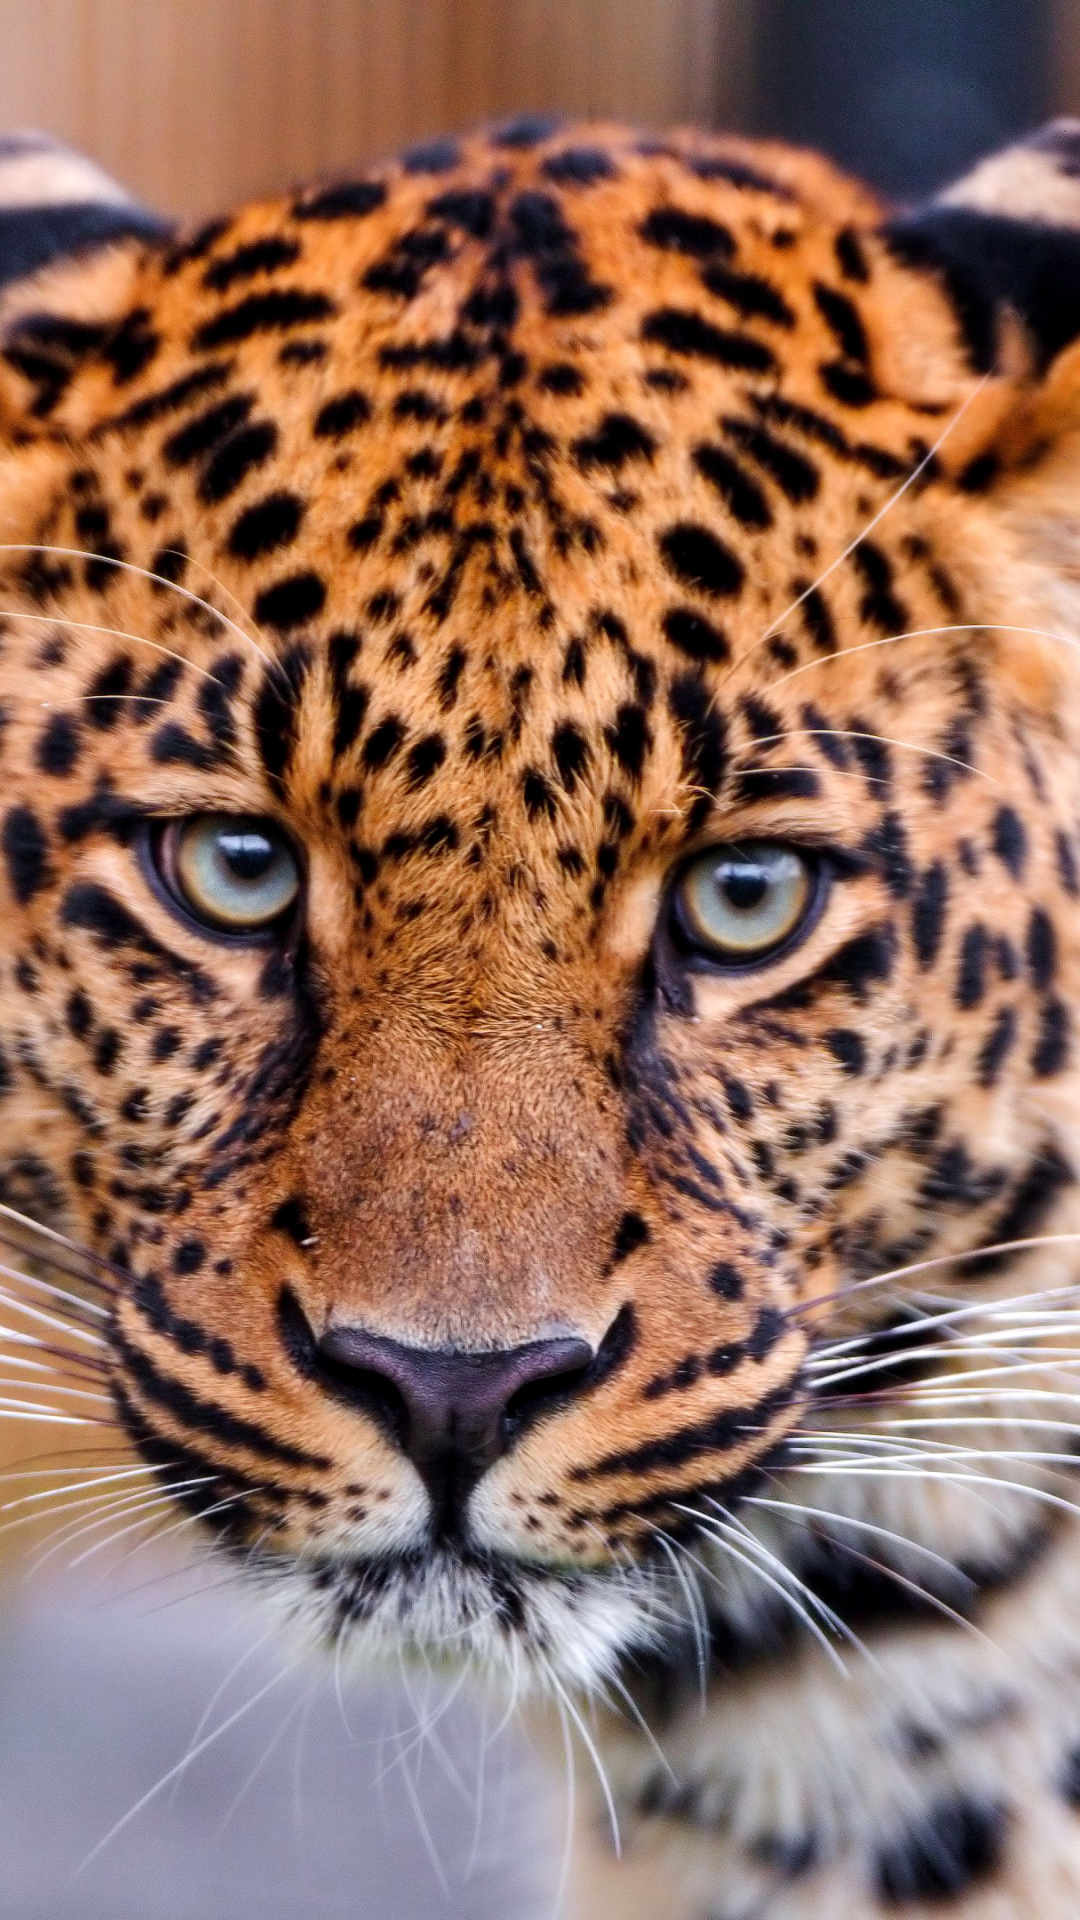 Leopard, National Geographic wallpaper 1080x1920